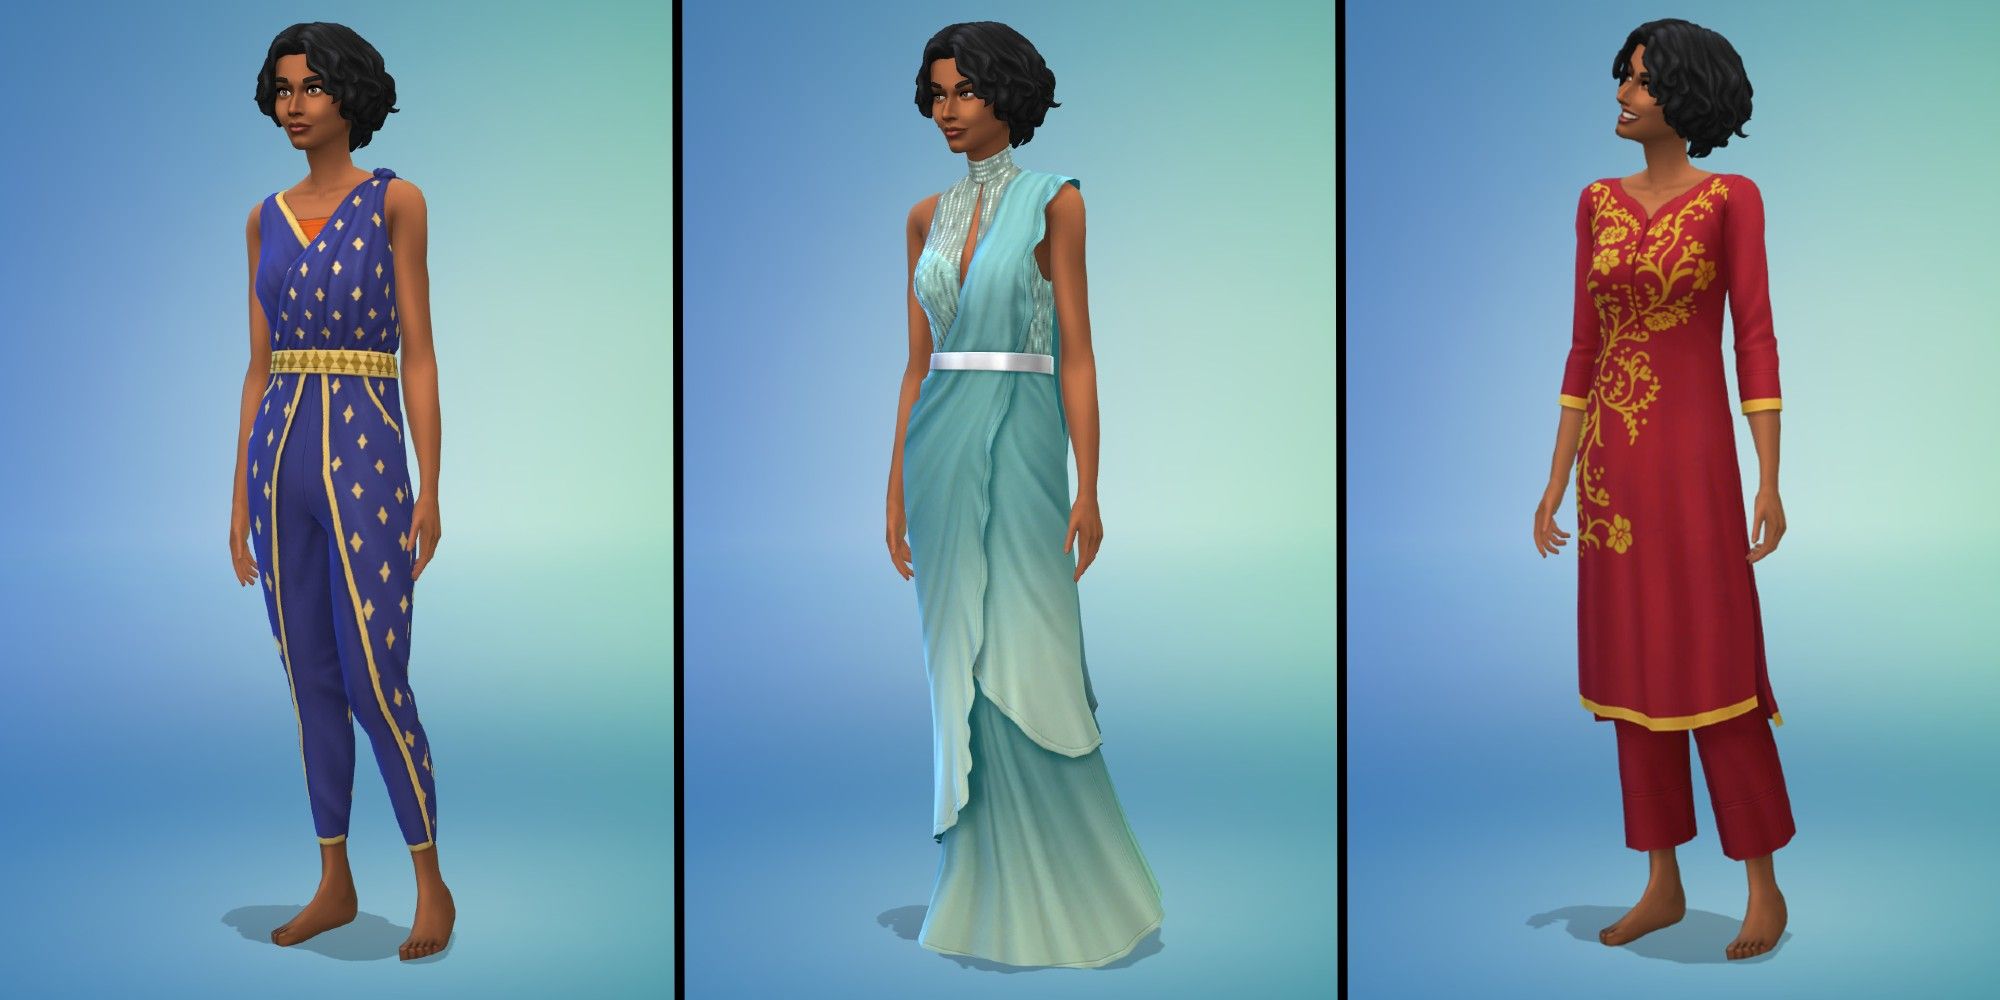 Sims 4: Fashion Steet Kit, Feminine Bottoms with default swatches, in the CAS Screen